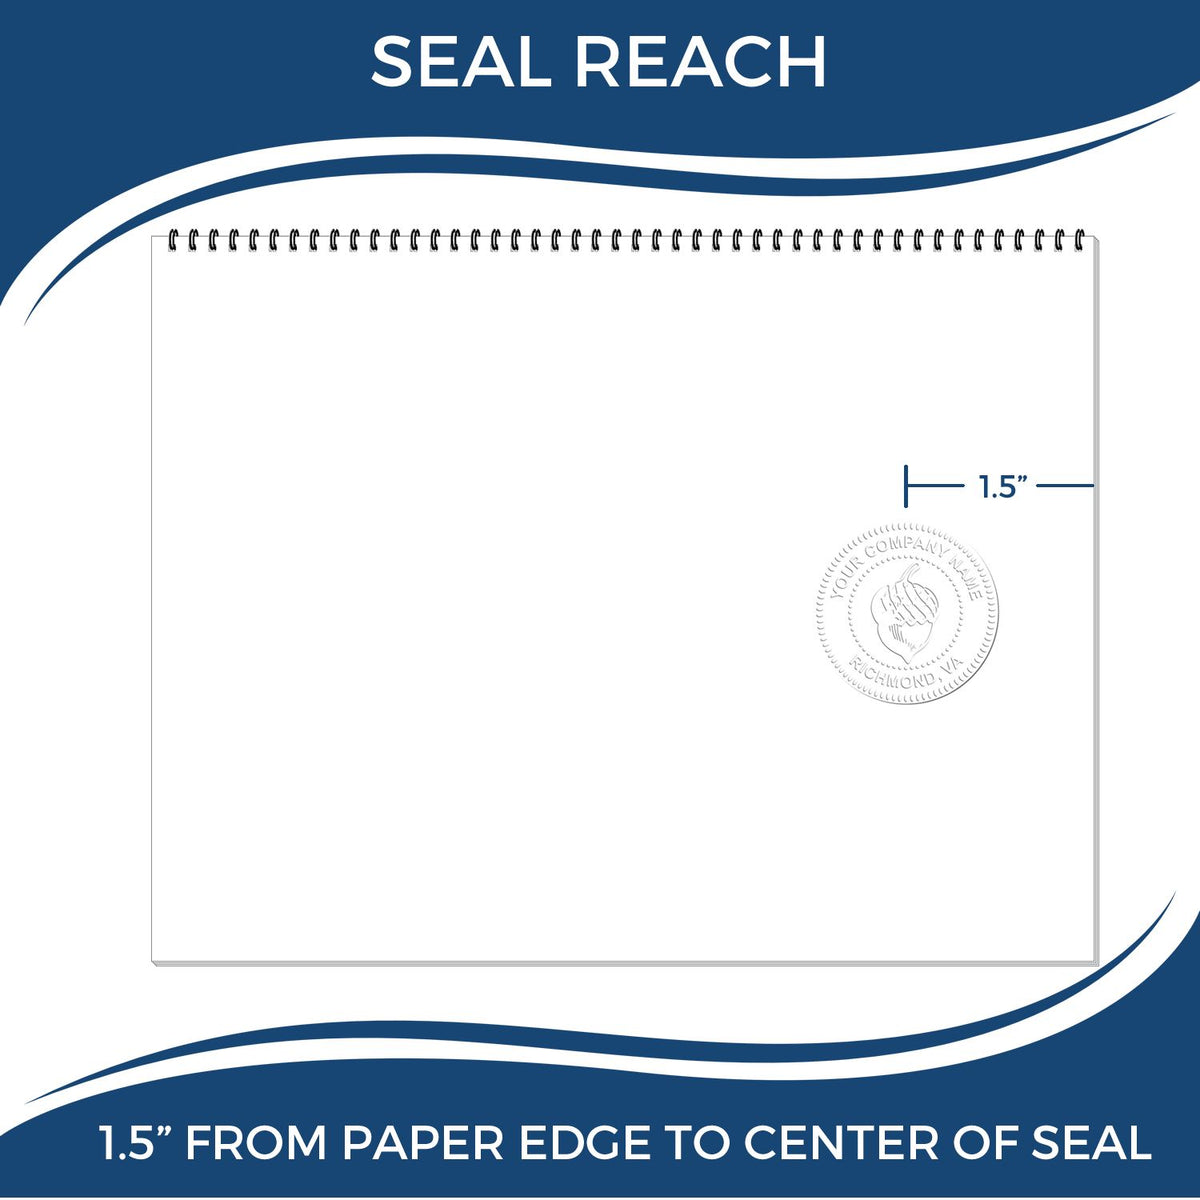 An infographic showing the seal reach which is represented by a ruler and a miniature seal image of the Maine Engineer Desk Seal